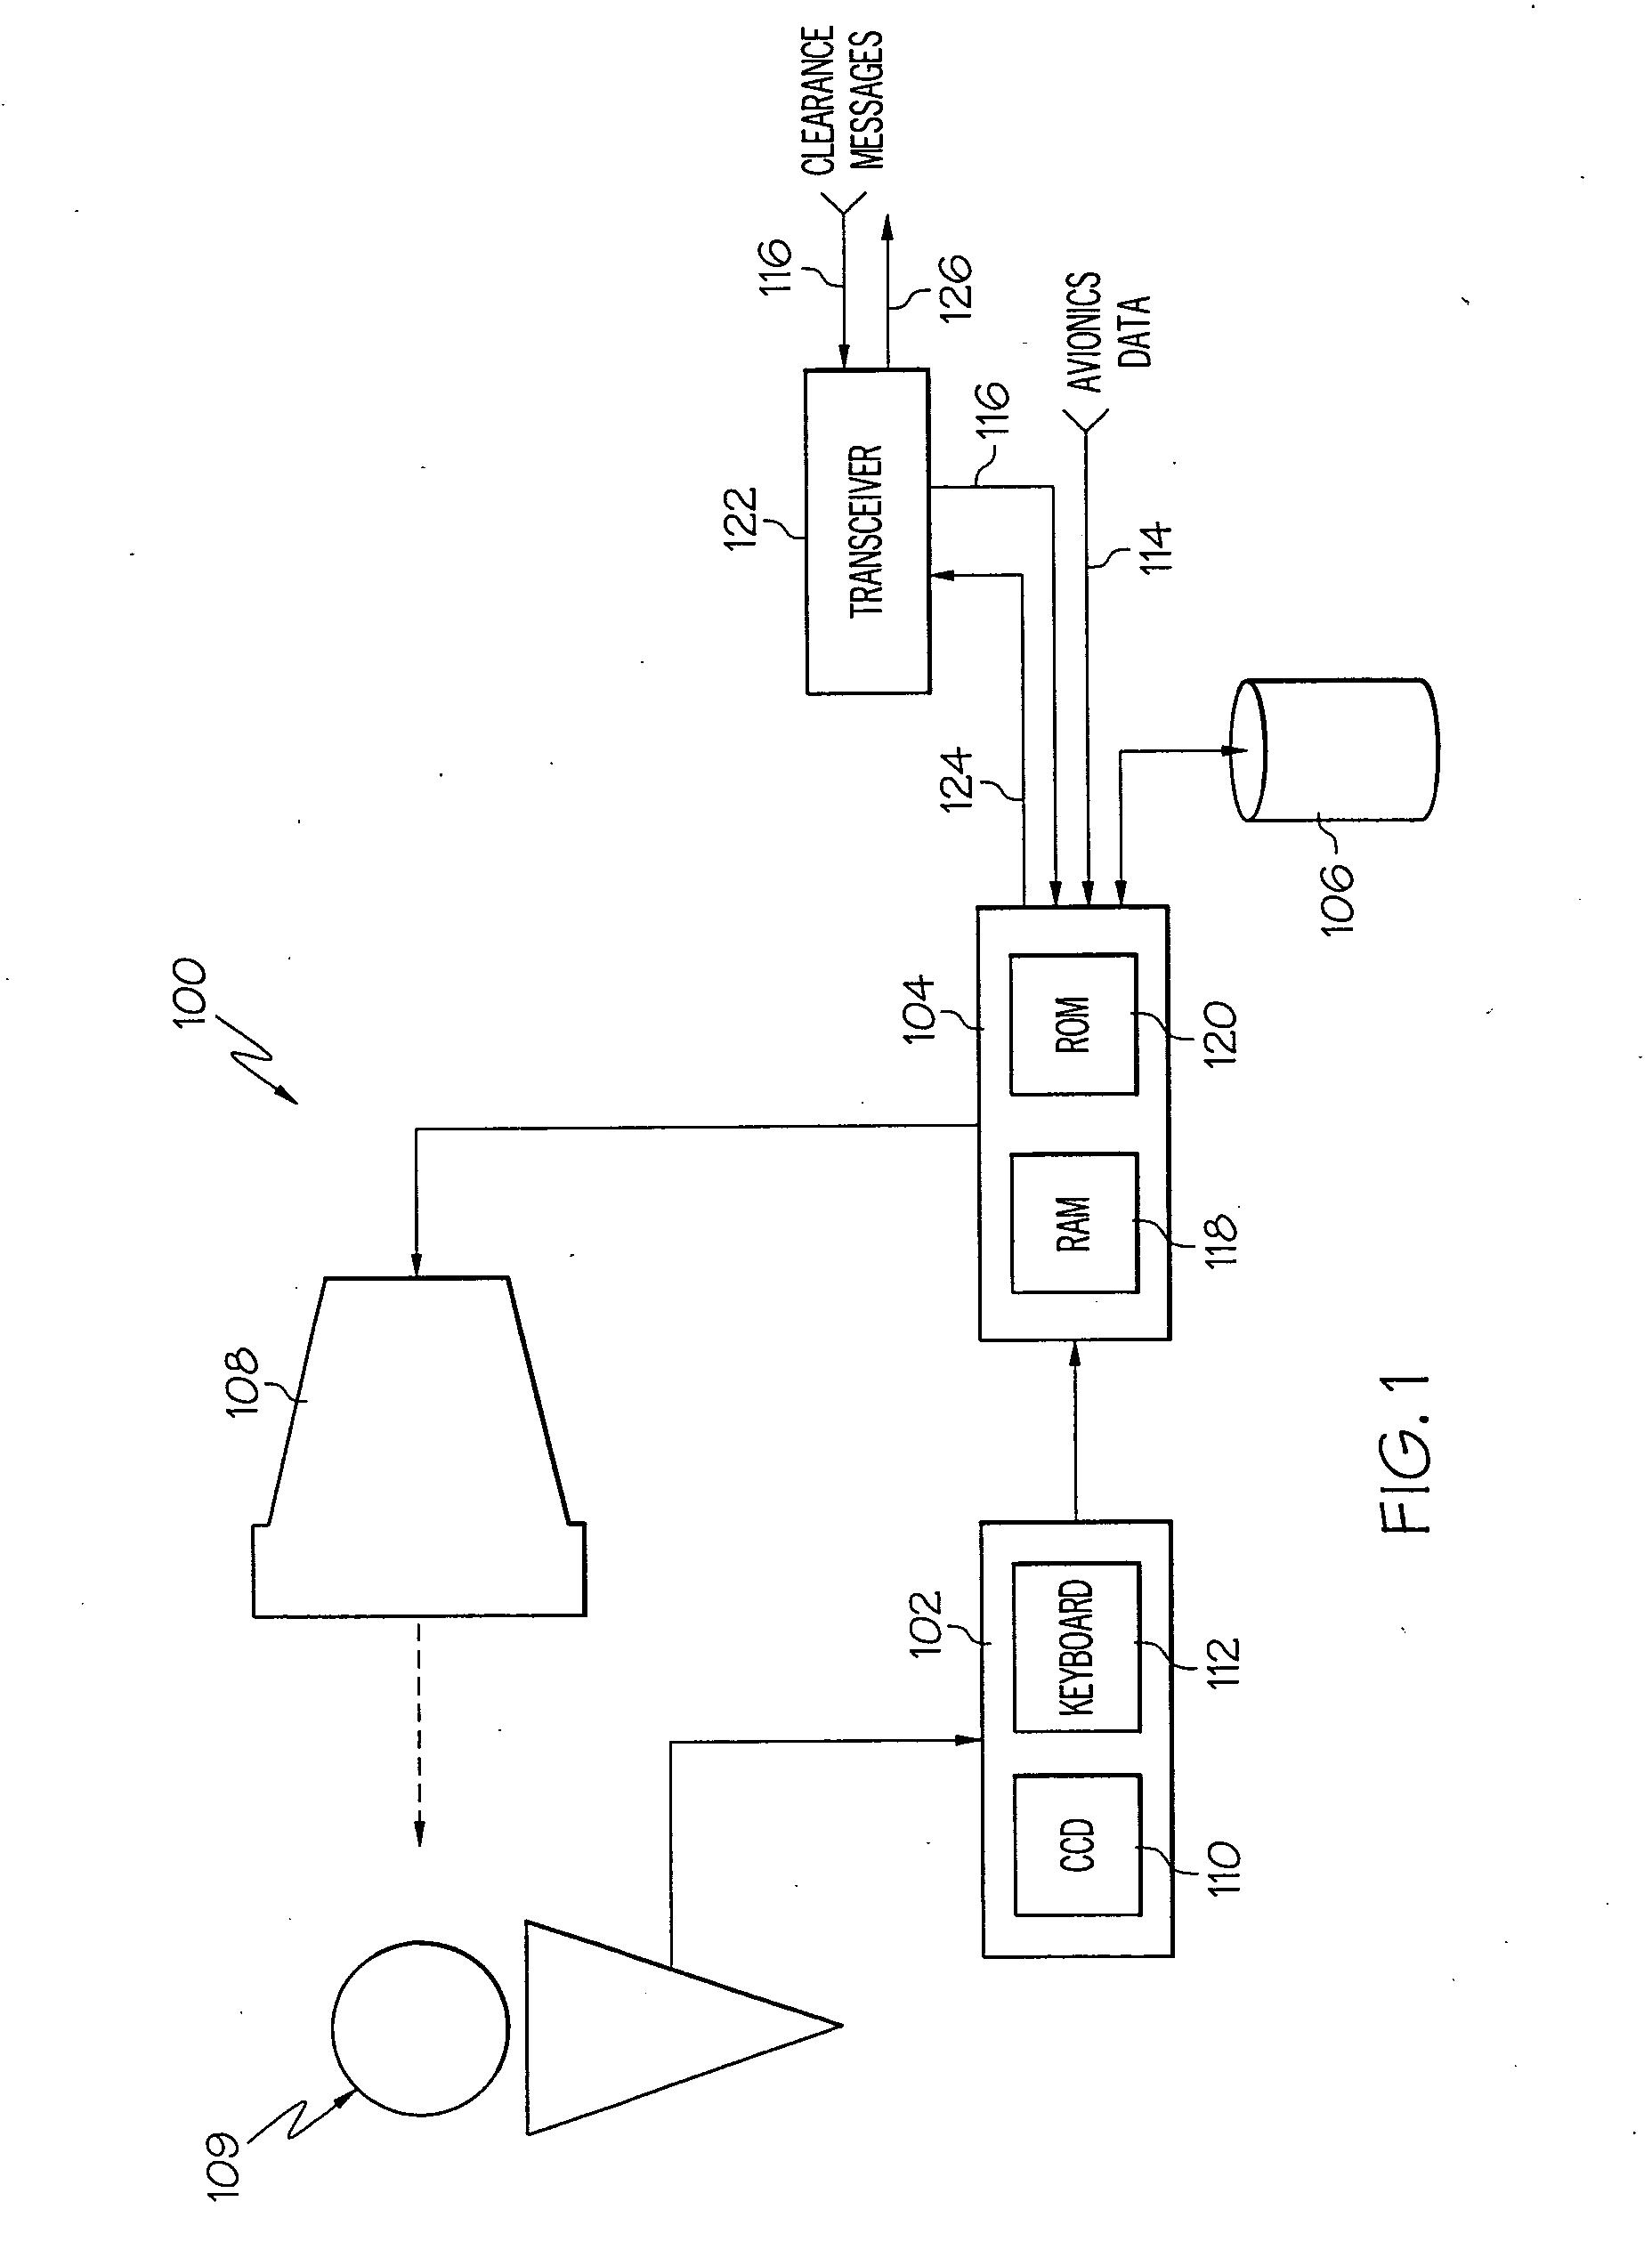 Integrated flight management and textual air traffic control display system and method